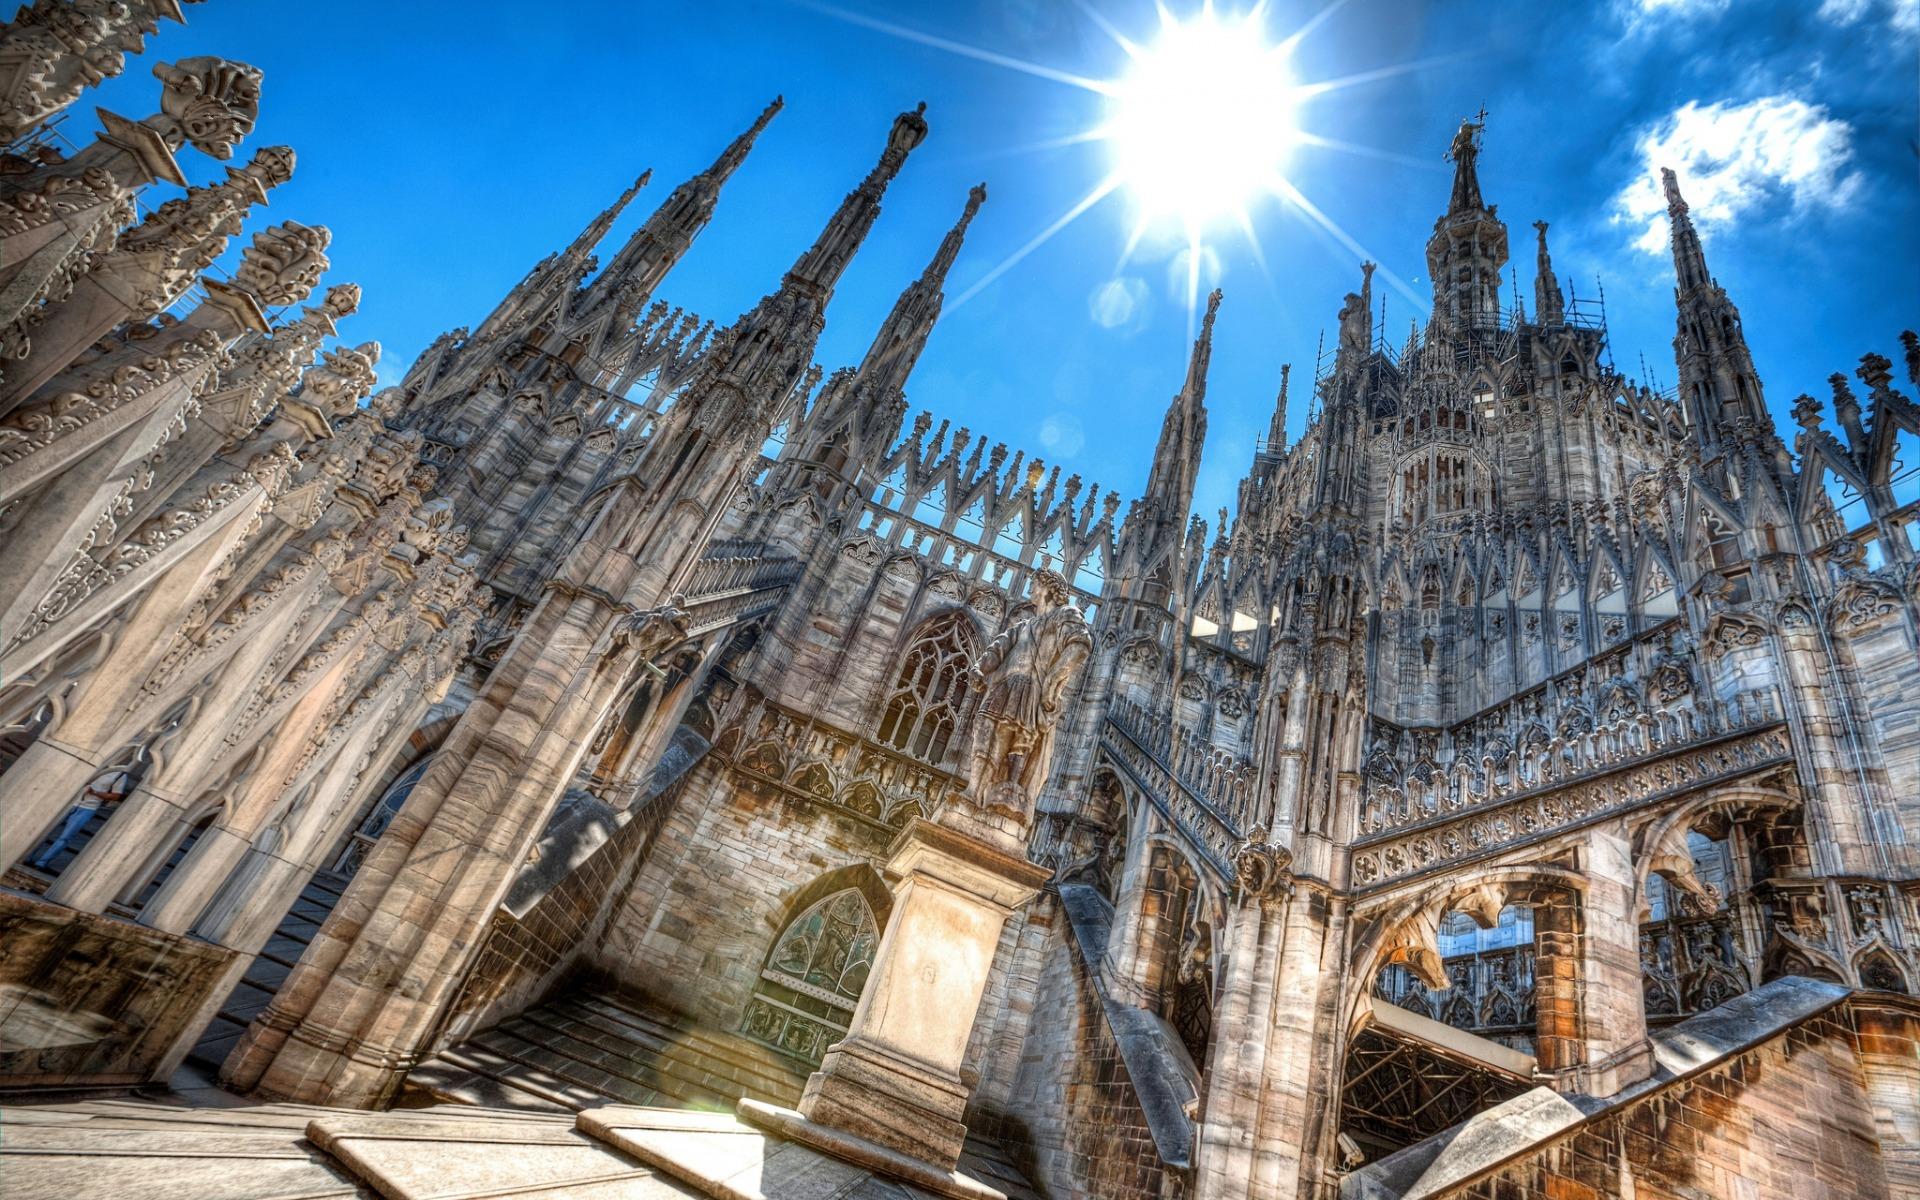 Download wallpaper Duomo, Milan cathedral, ancient architecture